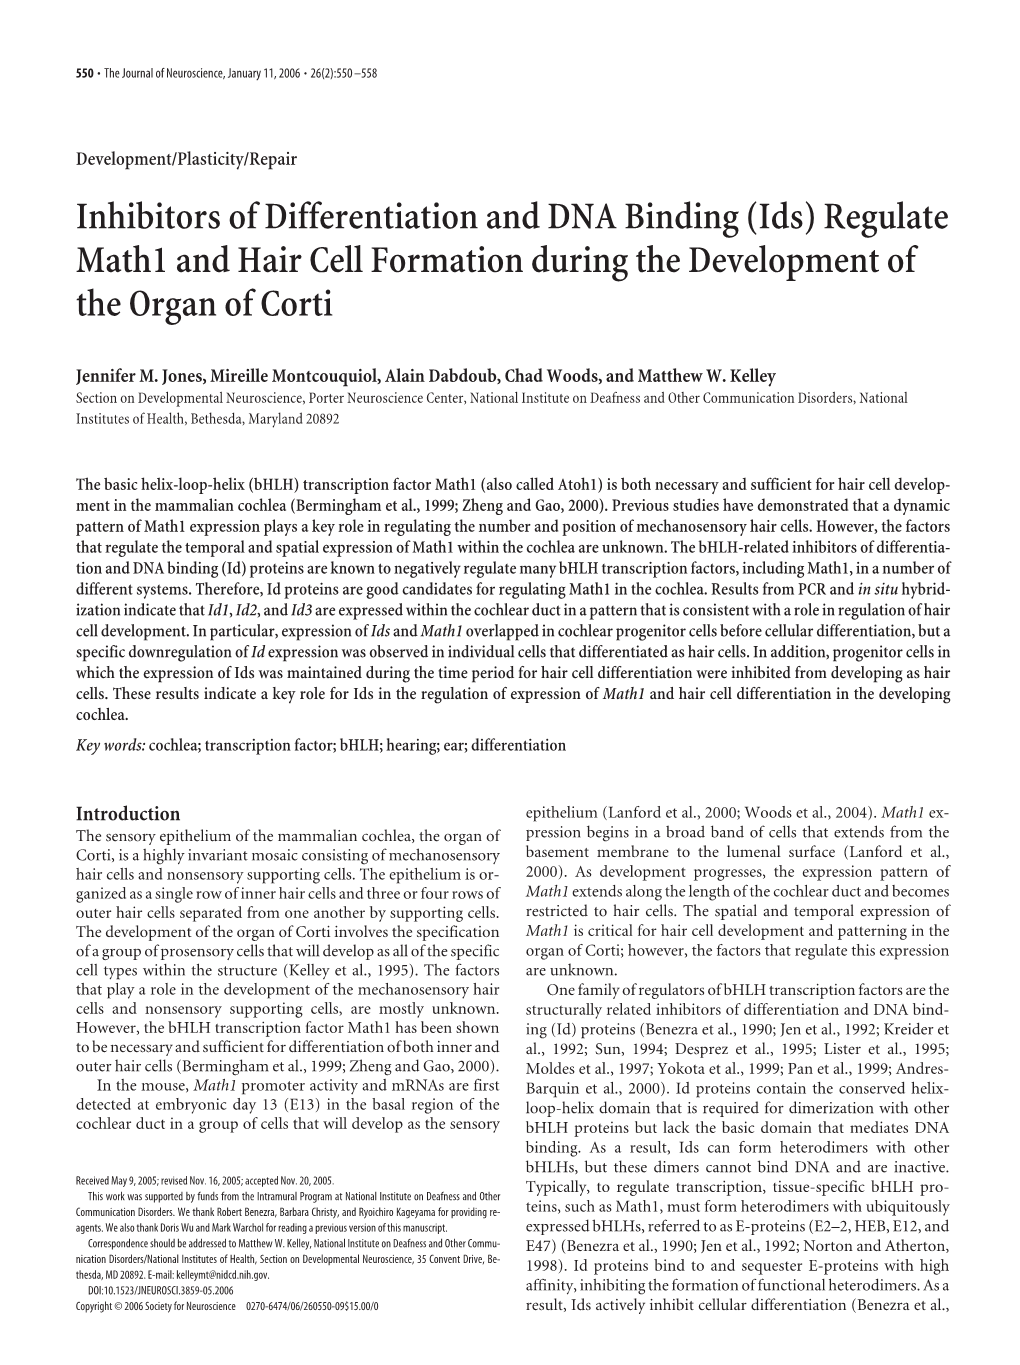 Inhibitors of Differentiation and DNA Binding (Ids) Regulate Math1 and Hair Cell Formation During the Development of the Organ of Corti